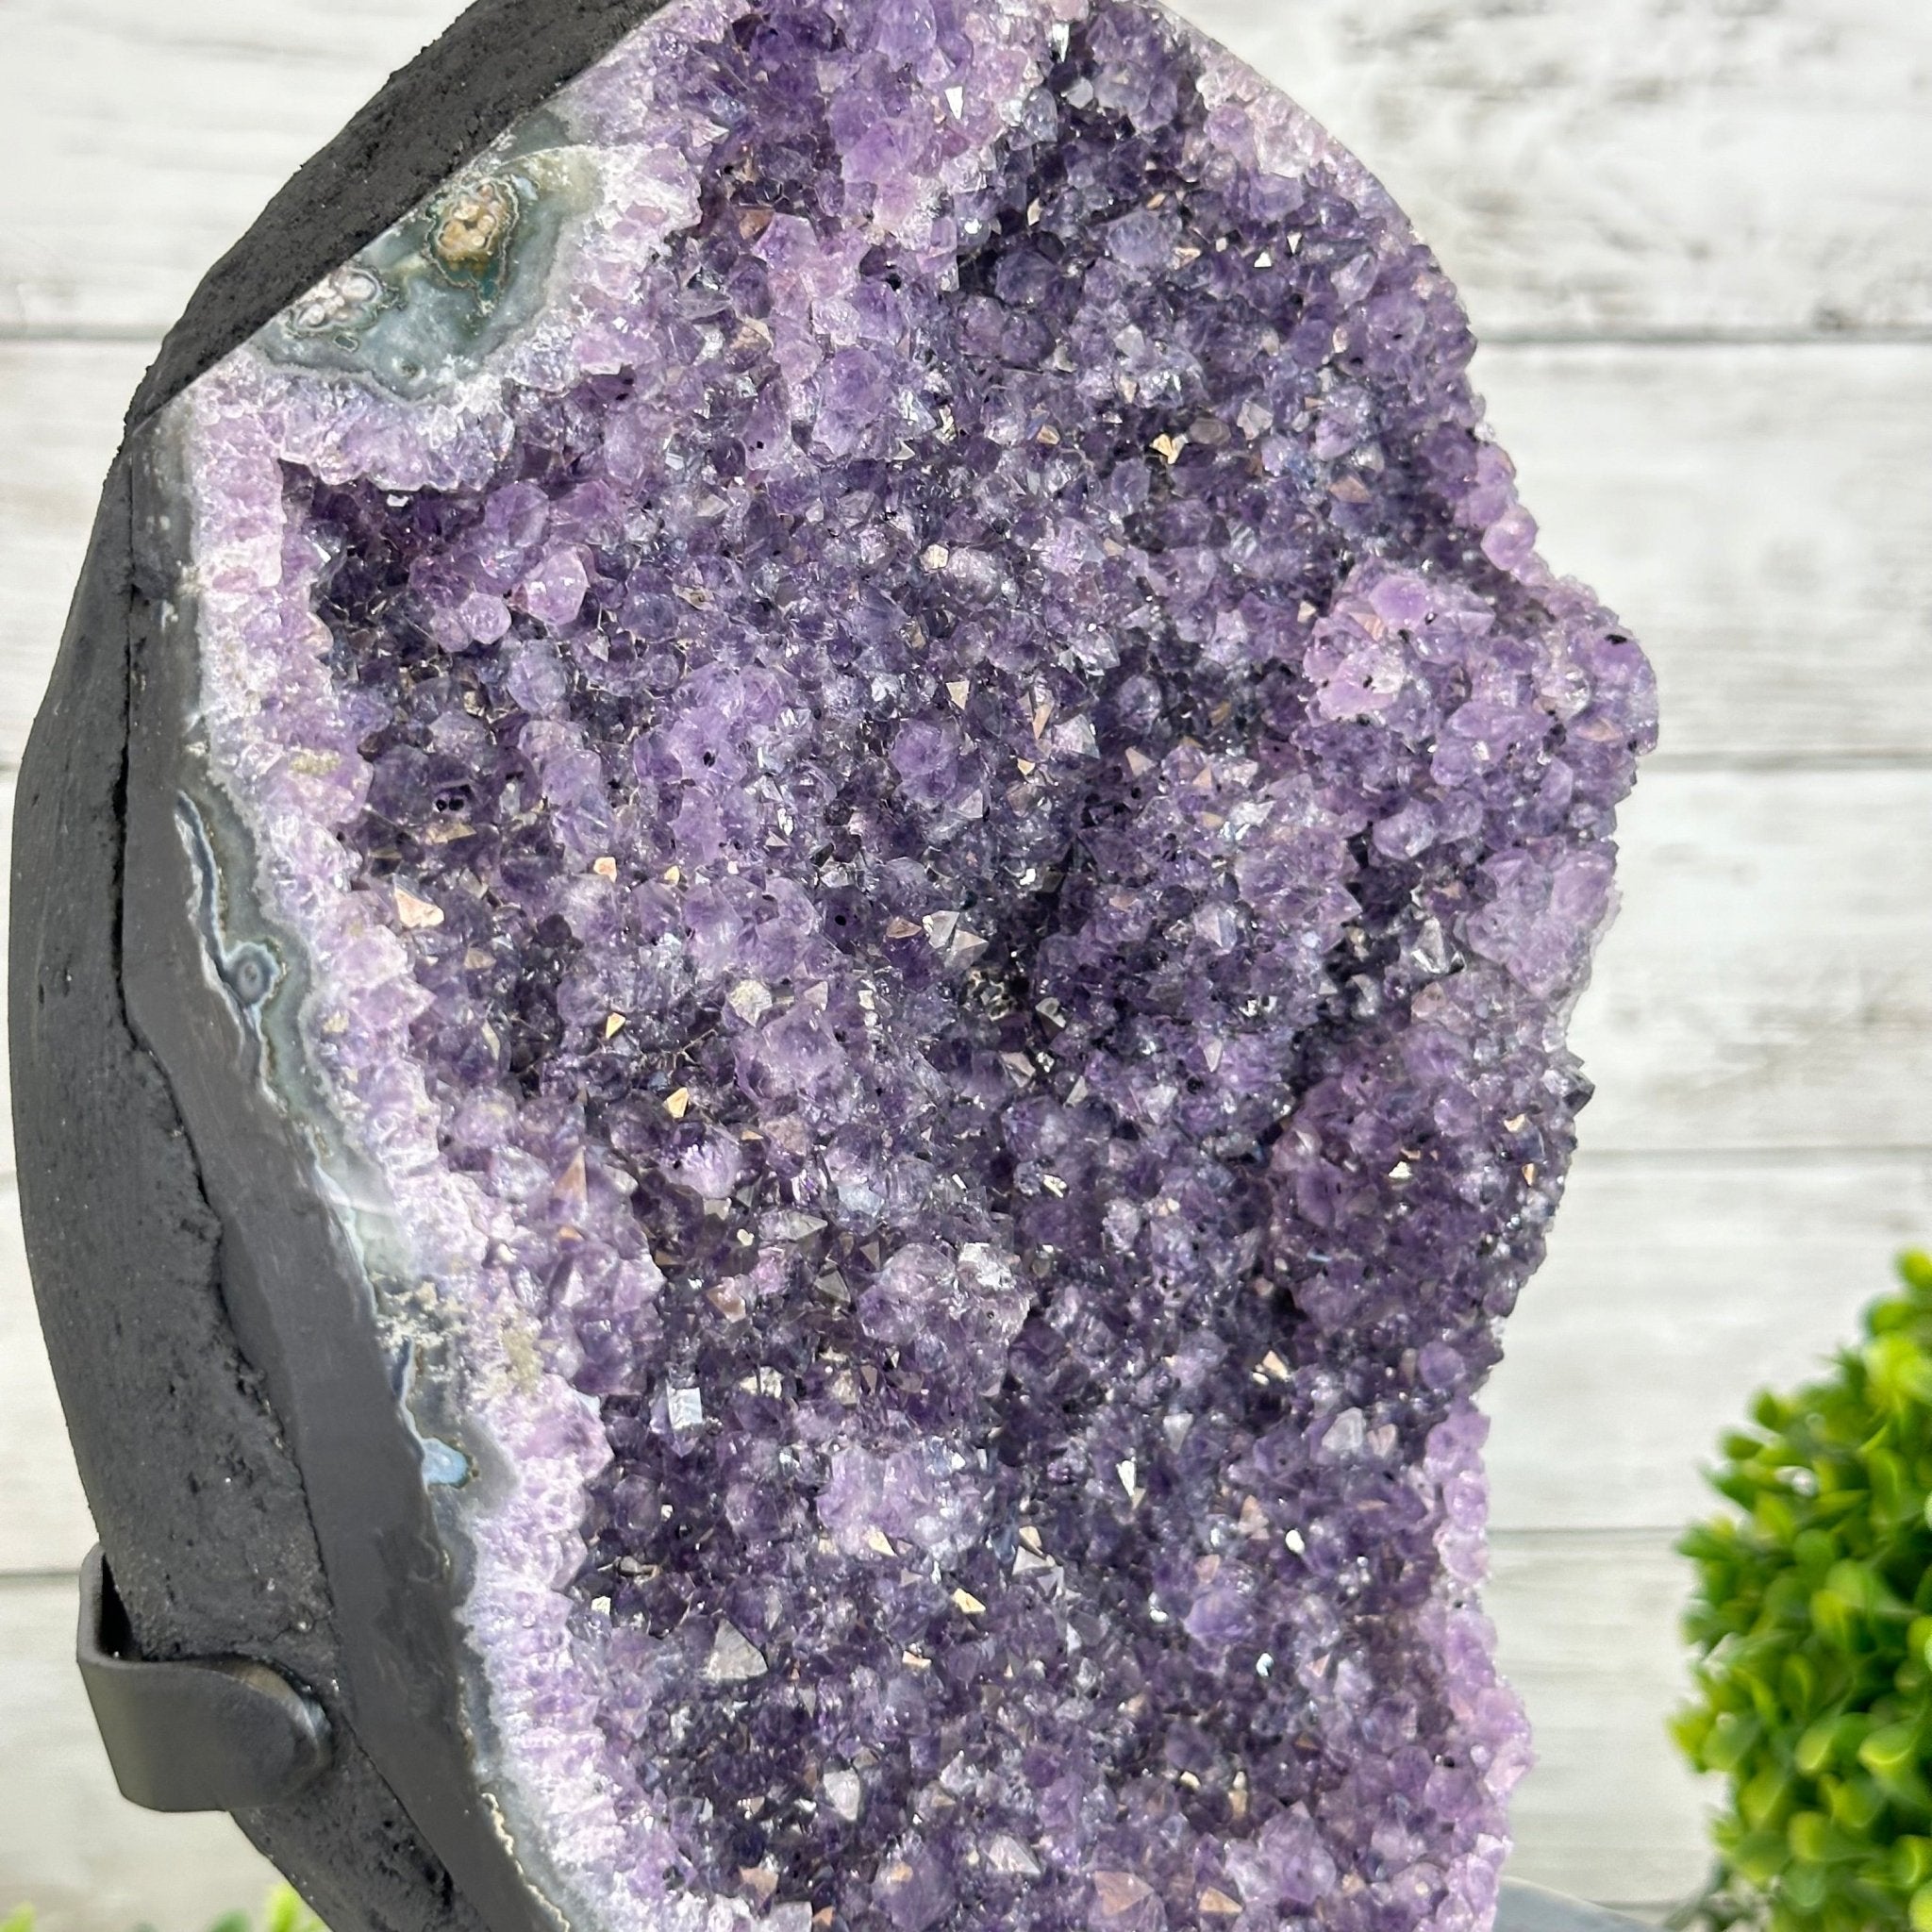 Quality Amethyst Cluster on a Metal Base, 12 lbs & 12.1" Tall #5491 - 0057 - Brazil GemsBrazil GemsQuality Amethyst Cluster on a Metal Base, 12 lbs & 12.1" Tall #5491 - 0057Clusters on Fixed Bases5491 - 0057